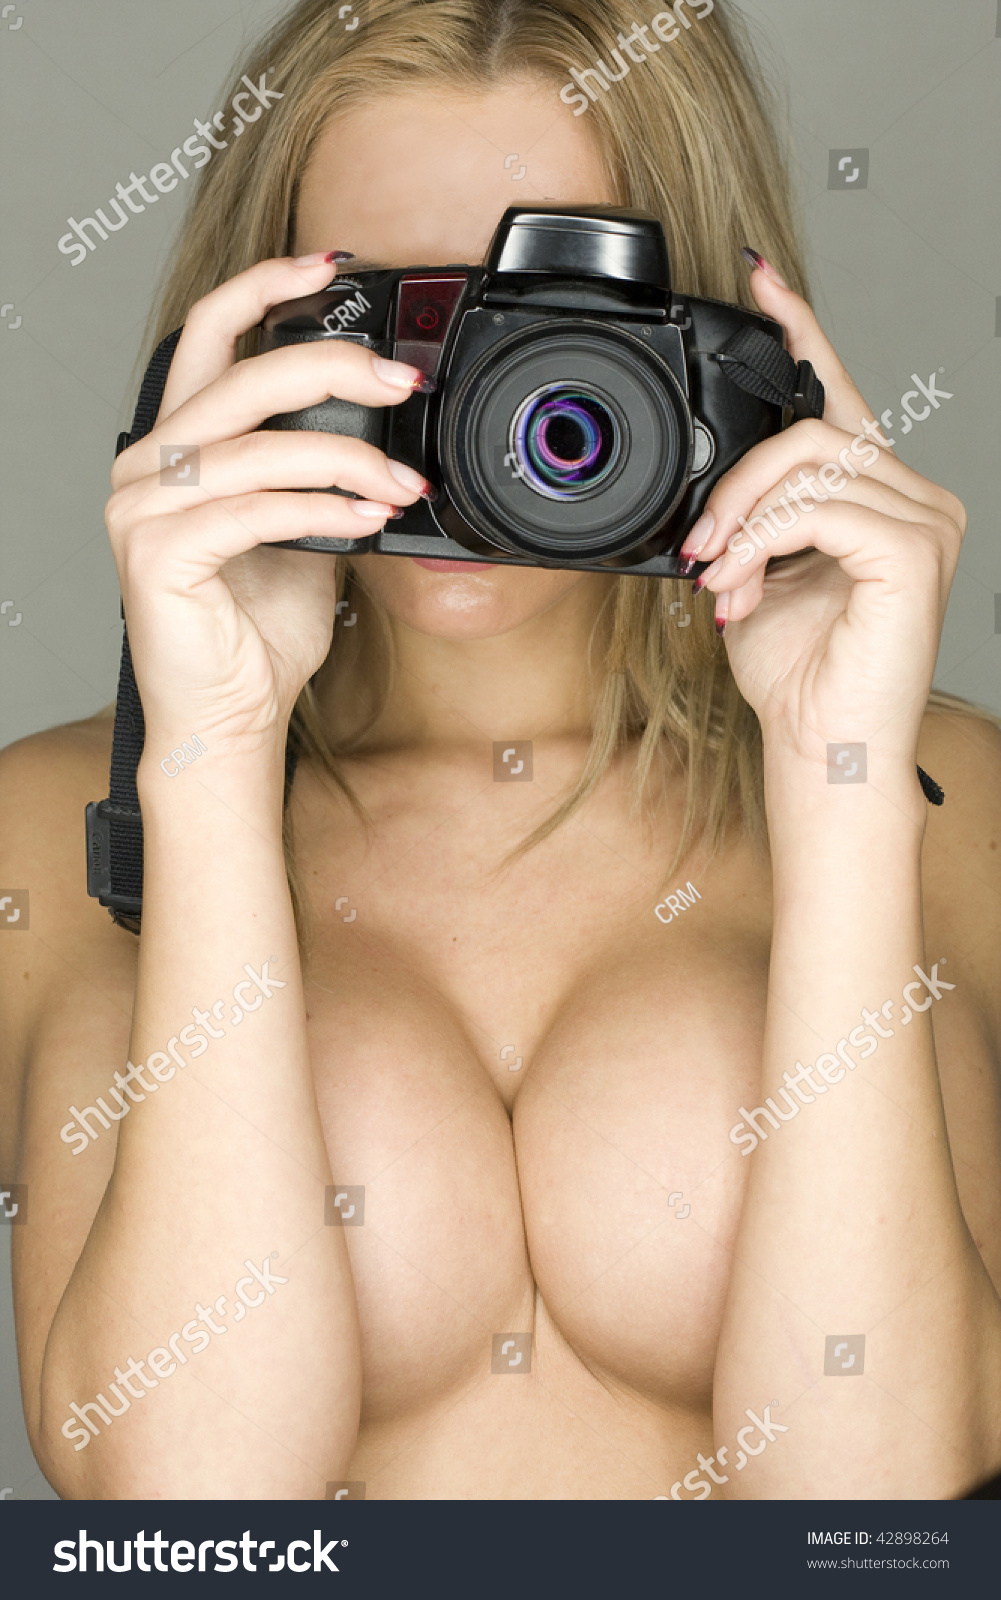 naked girl with camera